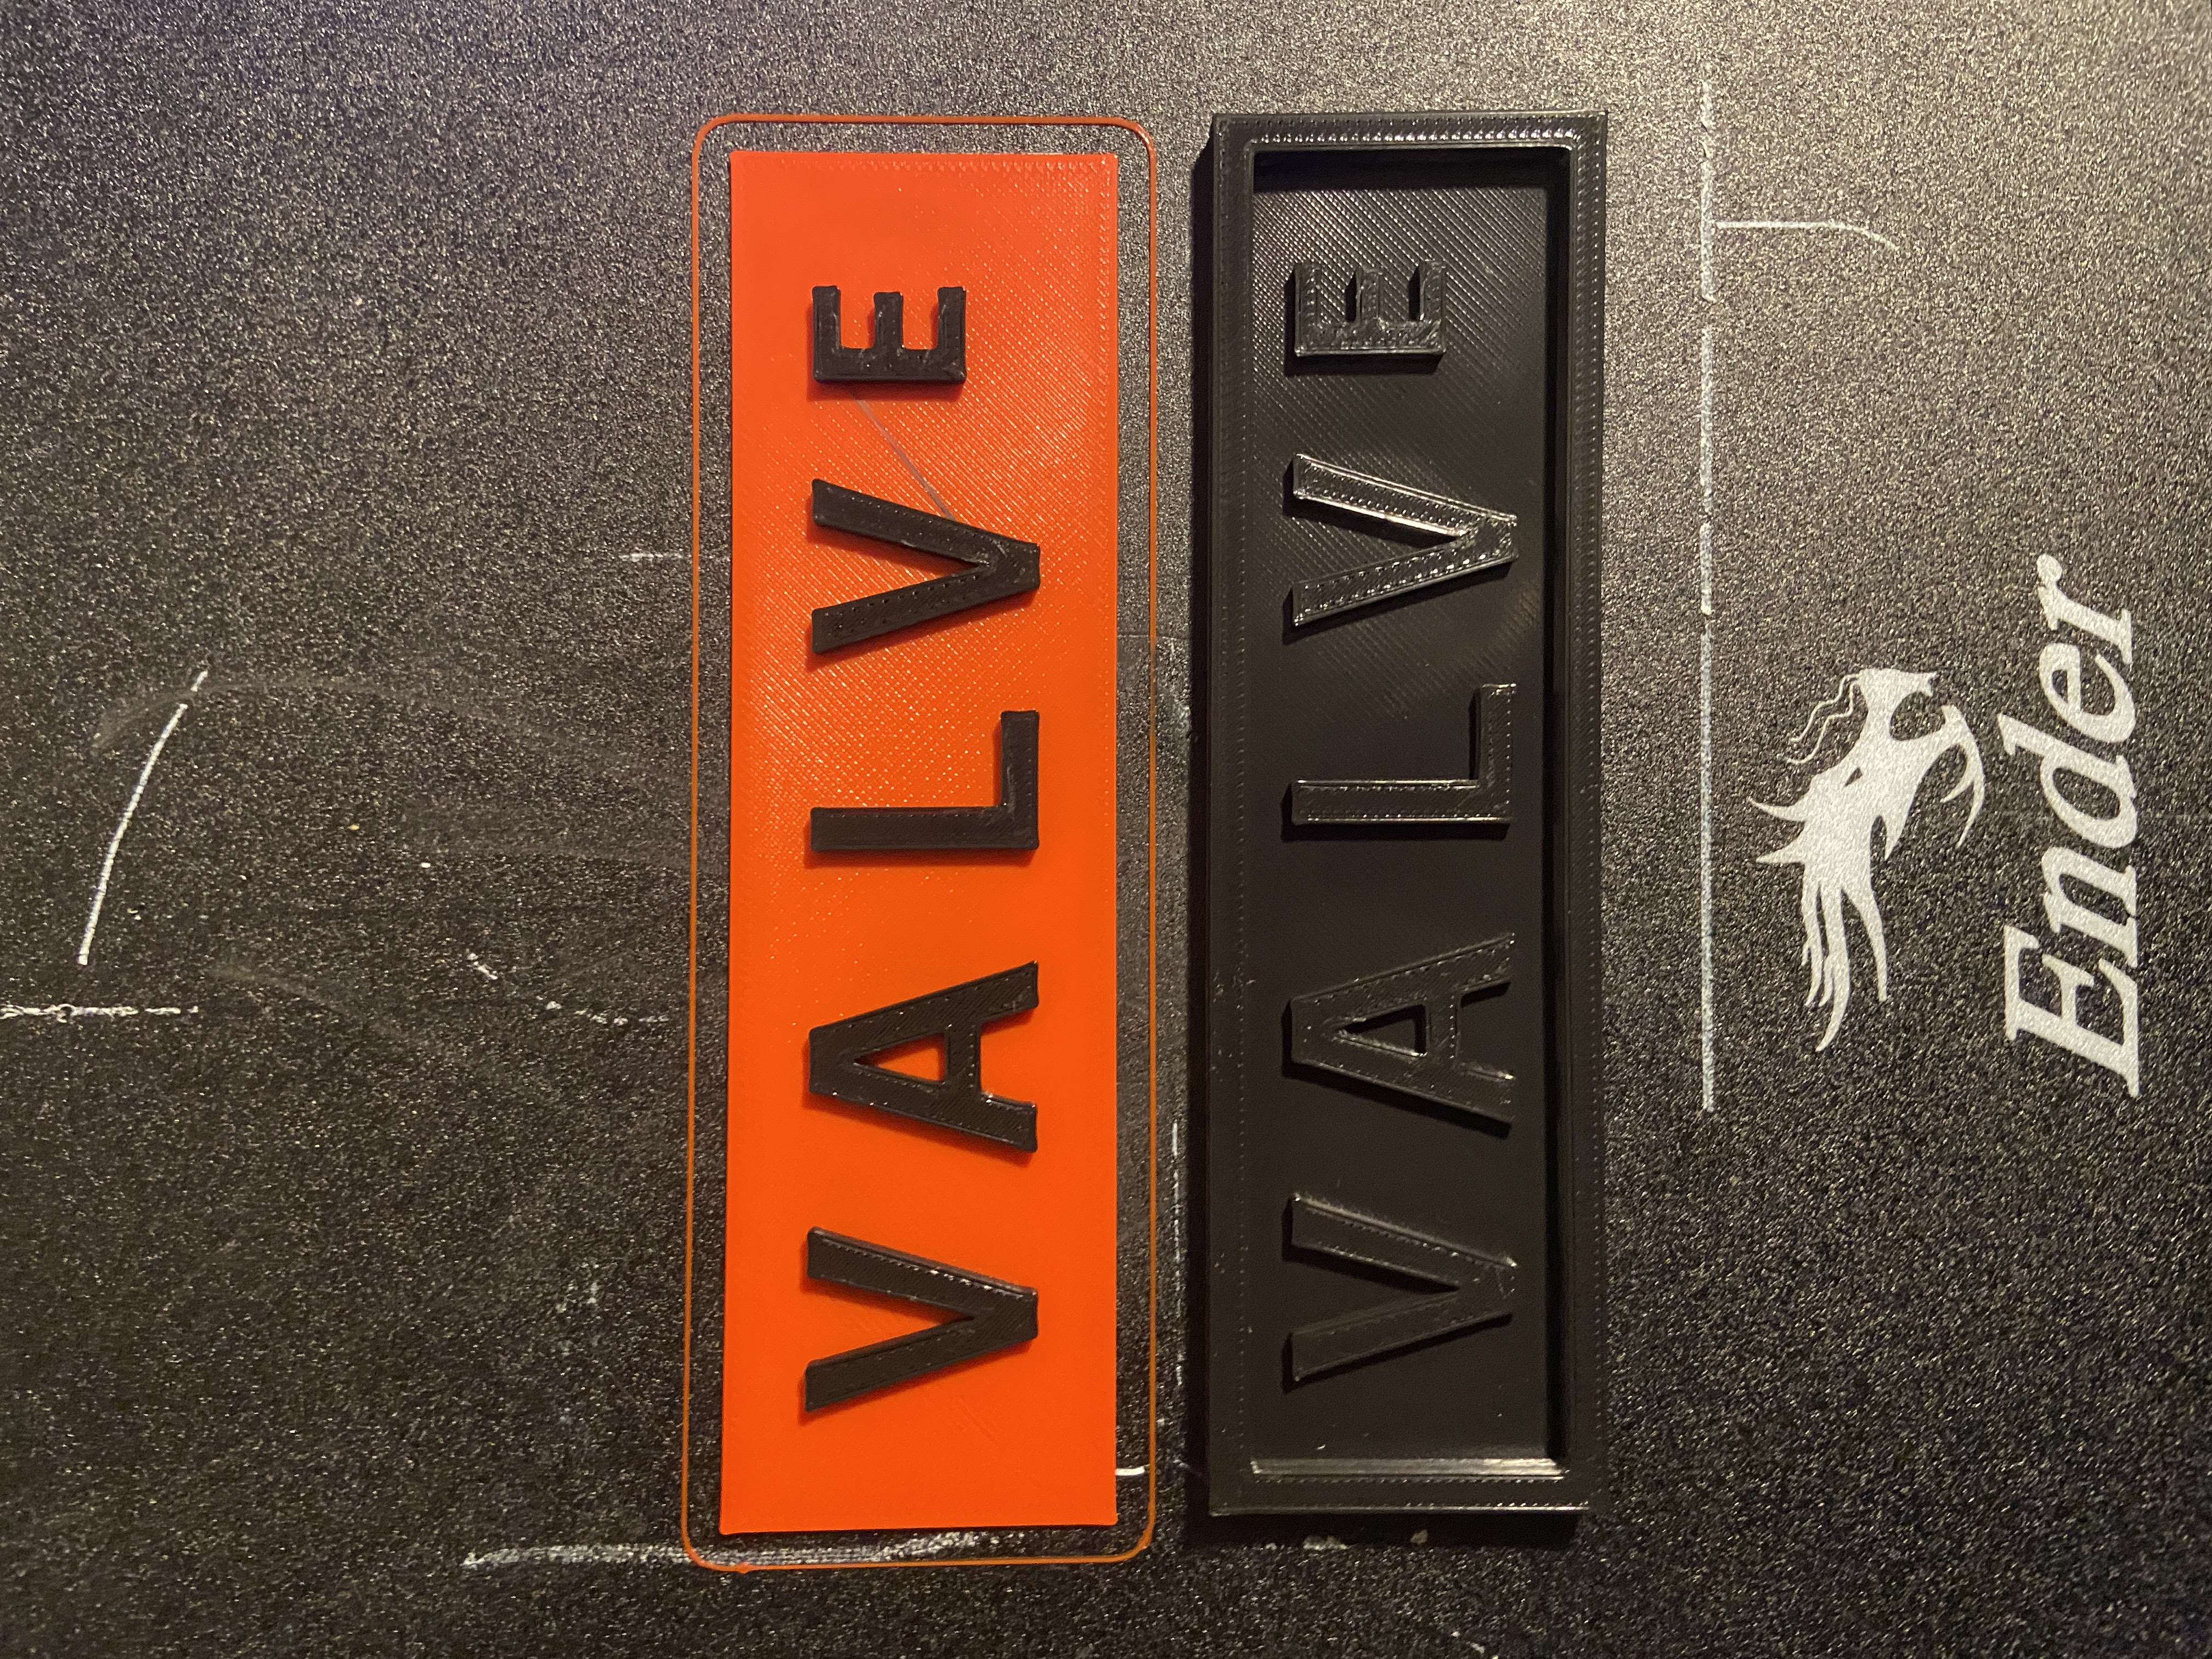 Valve Software Logos (Old/New)